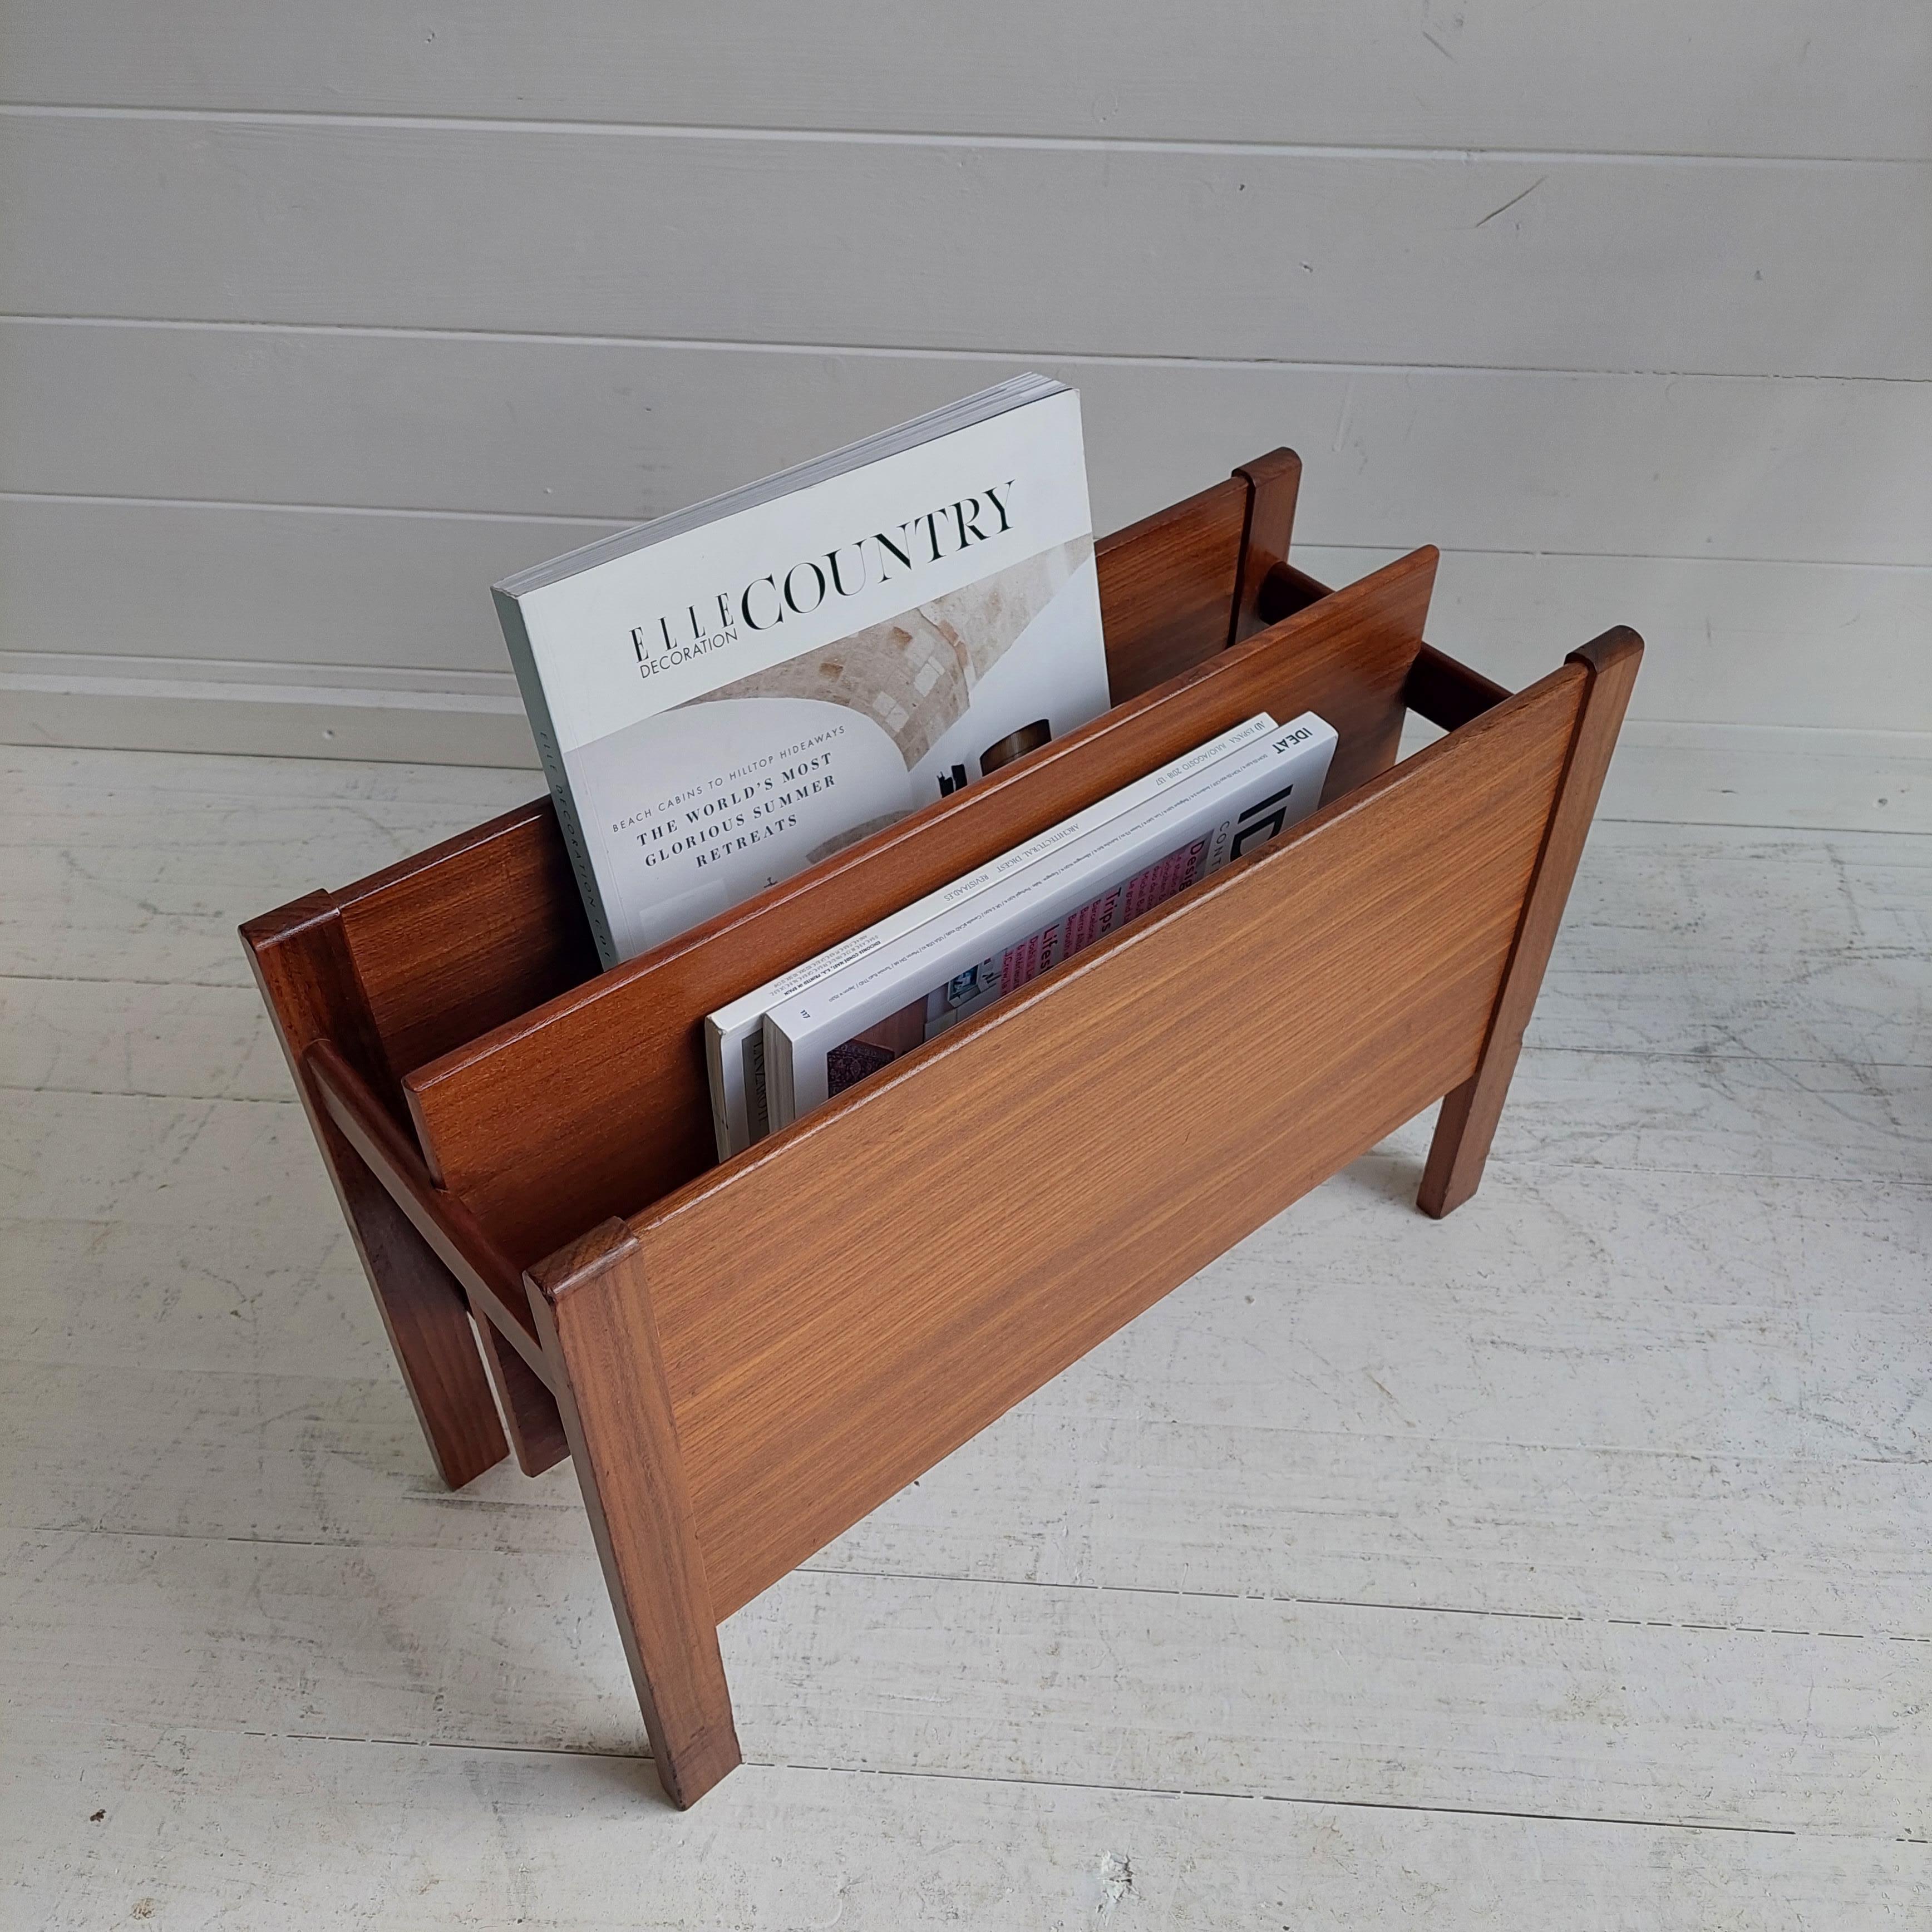 Mid-century teak magazine rack. 
Usually saud that was Designed by Guy Rogers, the 'Canterbury' magazine rack was made for Heals department store in the 1960's, but could be by Fyne Ladye Furniture ( Henry Stone ).

A minimalist design,